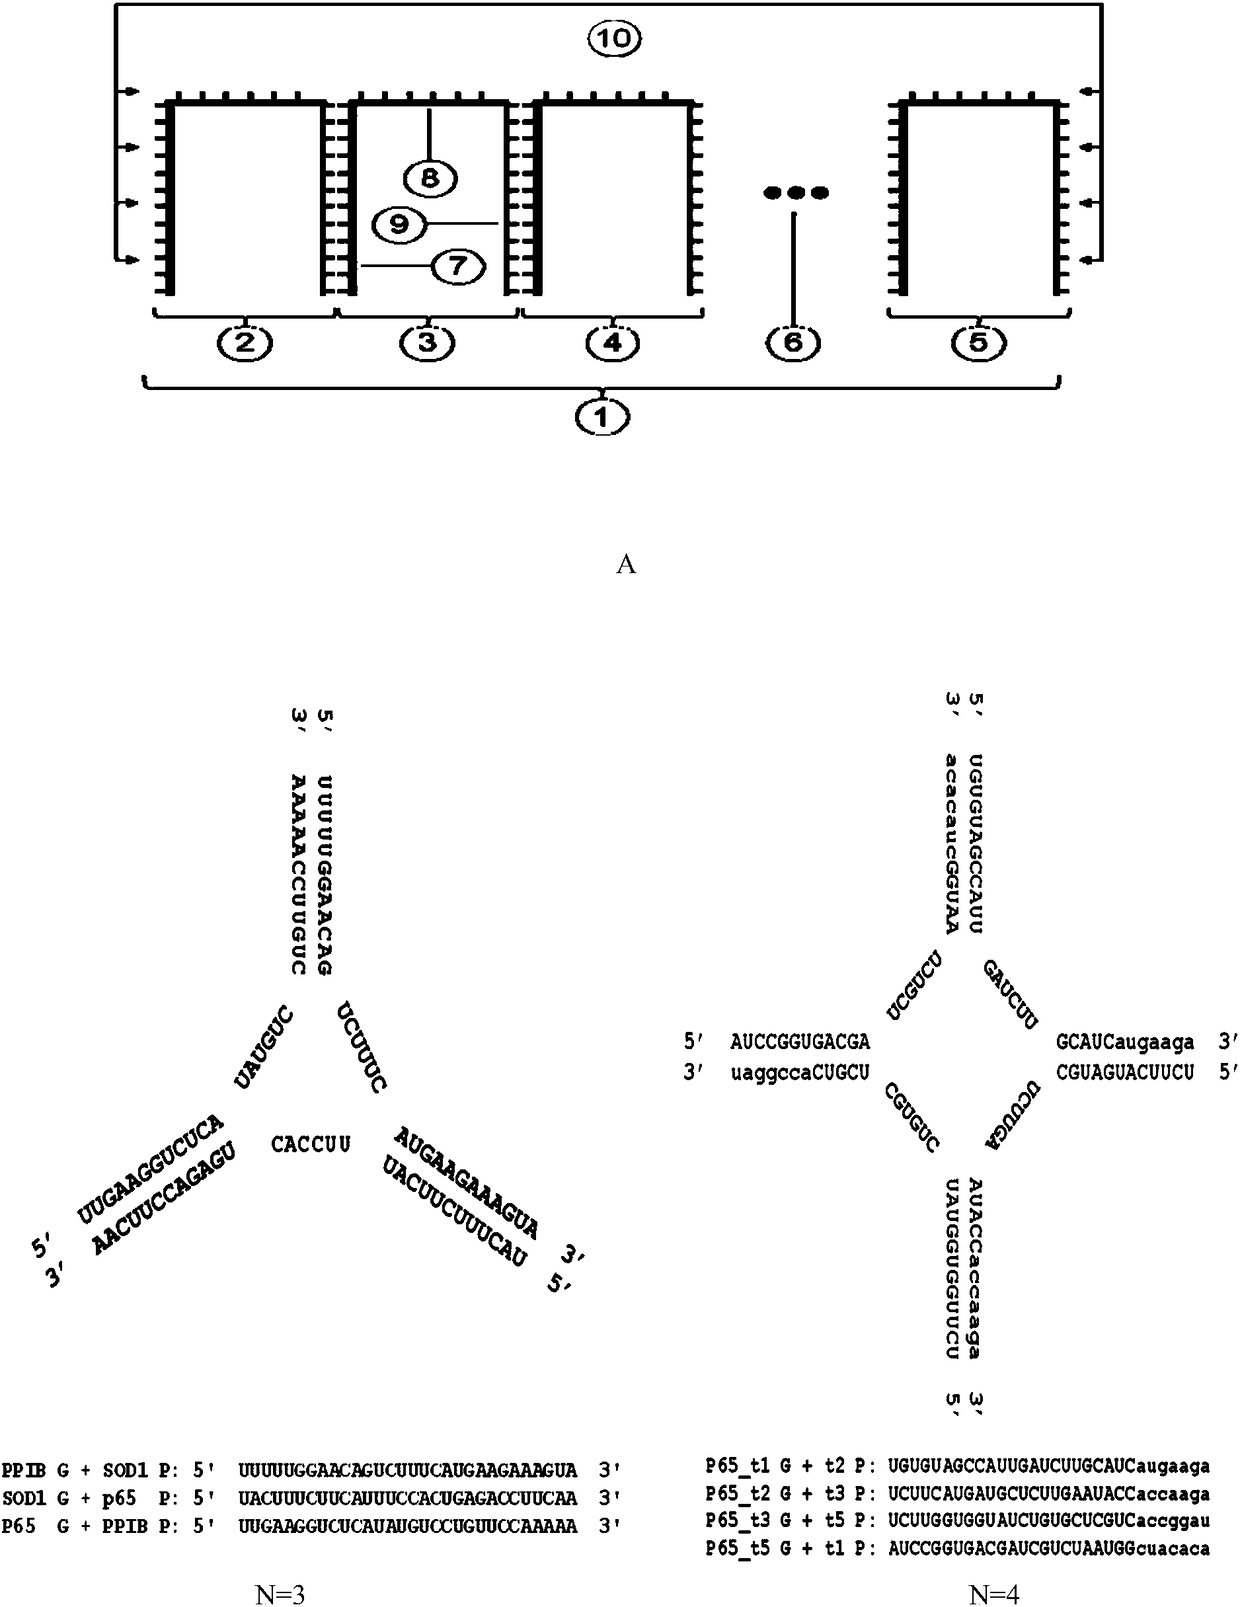 Polyoligonucleic acid molecule and its application in multi-target interference